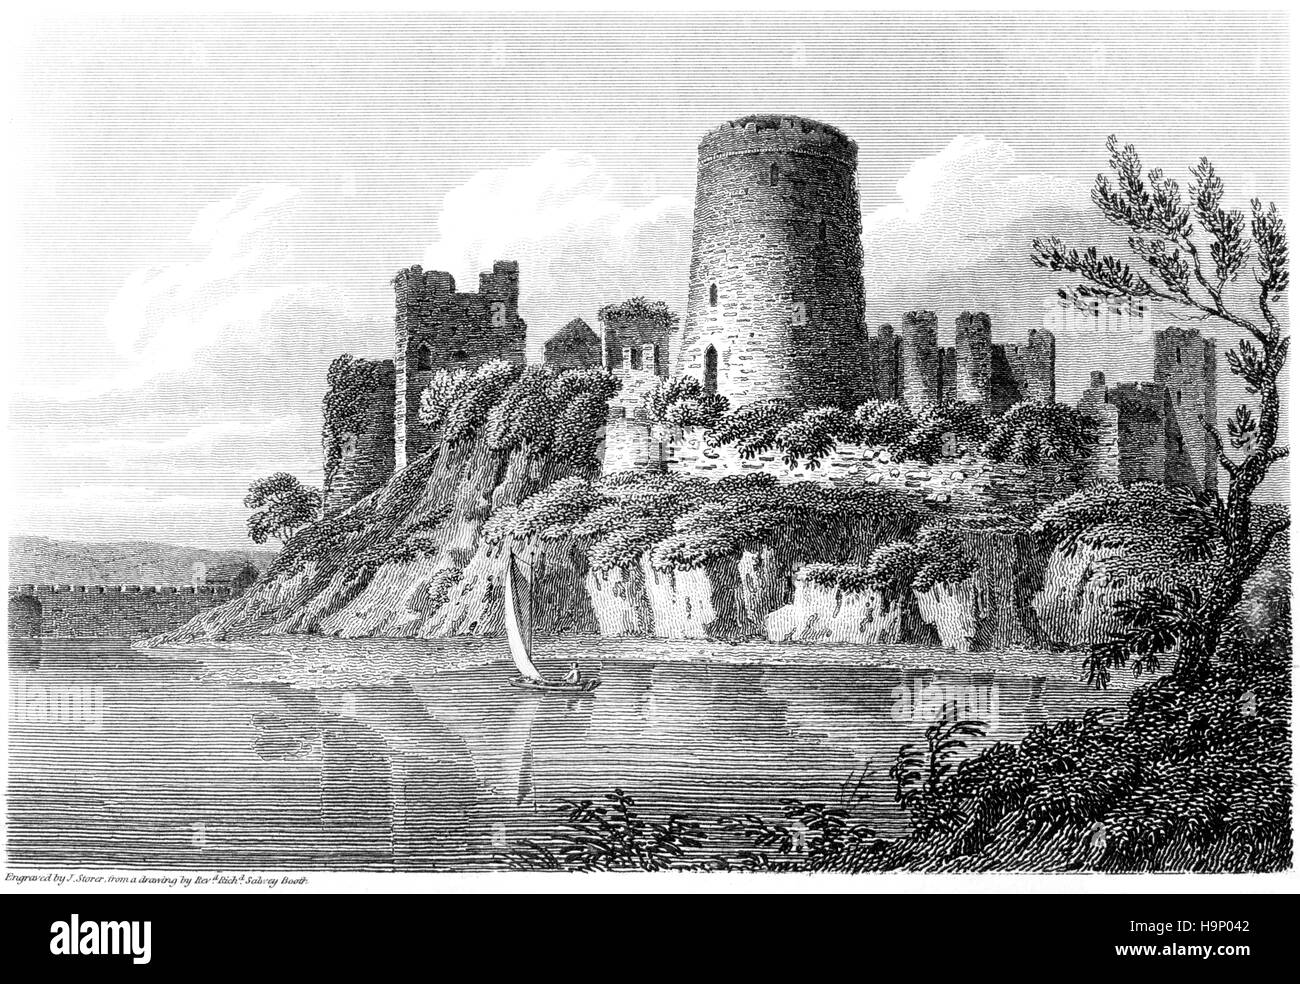 An engraving of Pembroke Castle, Pembrokeshire scanned at high resolution from a book printed in 1812. Believed copyright free. Stock Photo